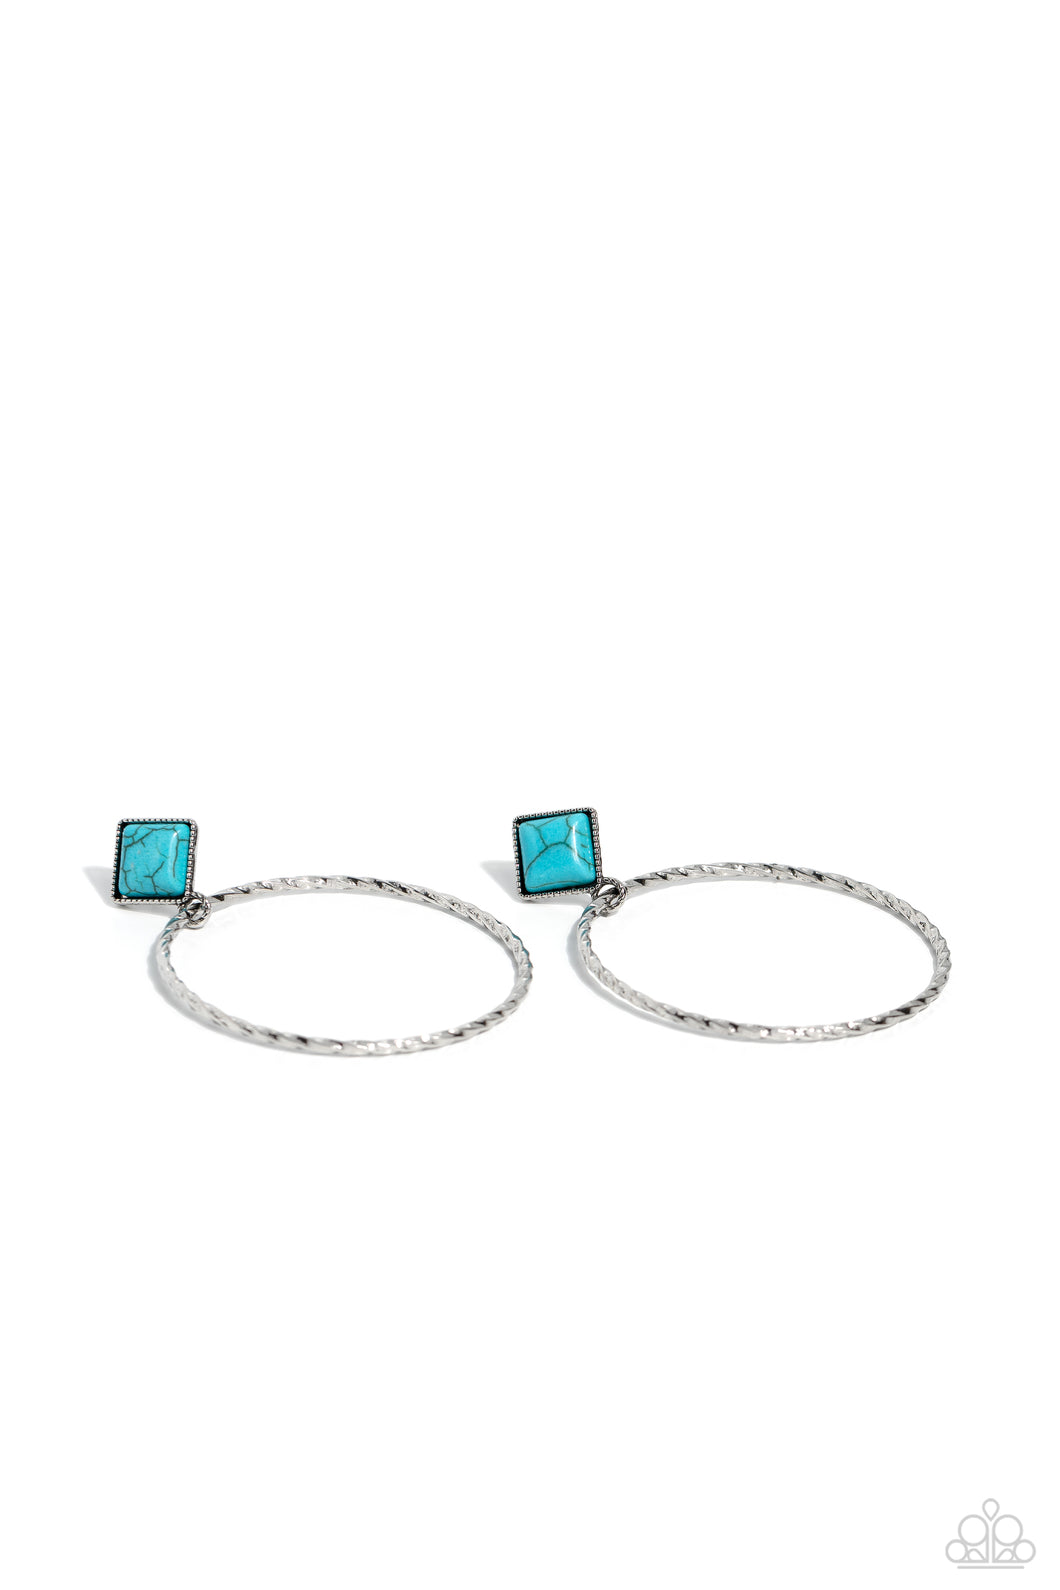 Canyon Circlet - Blue (Turquoise) Post Earring